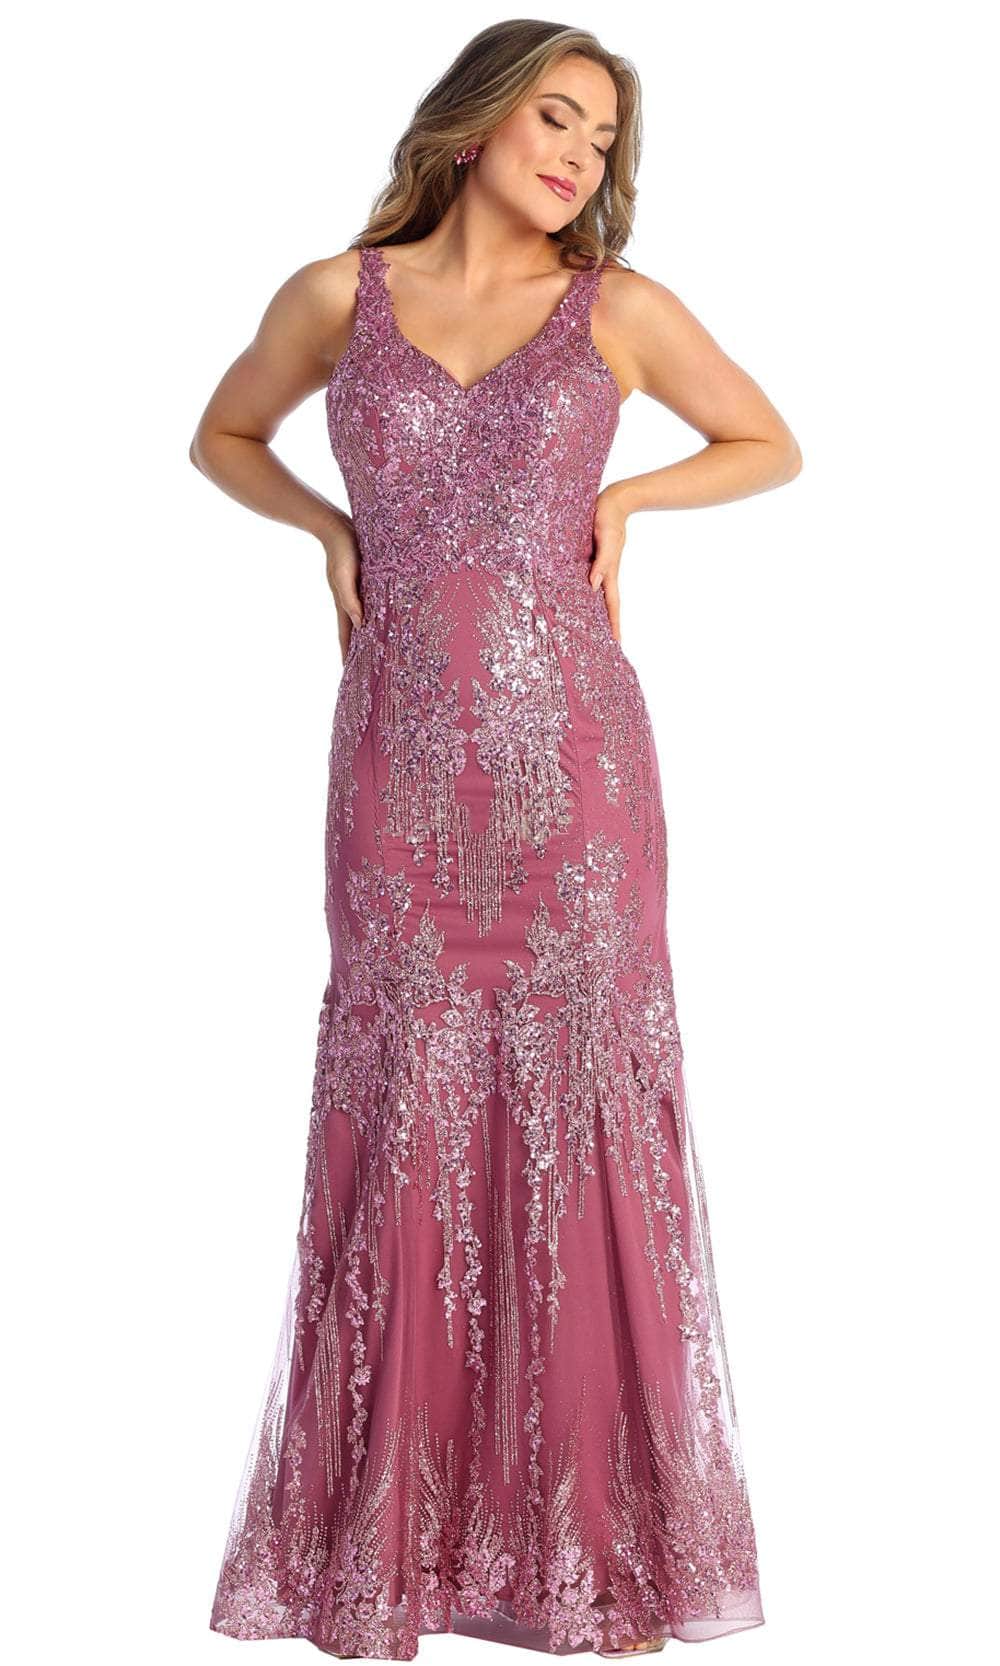 Image of May Queen RQ7941 - Sequined Cut-out Evening Dress